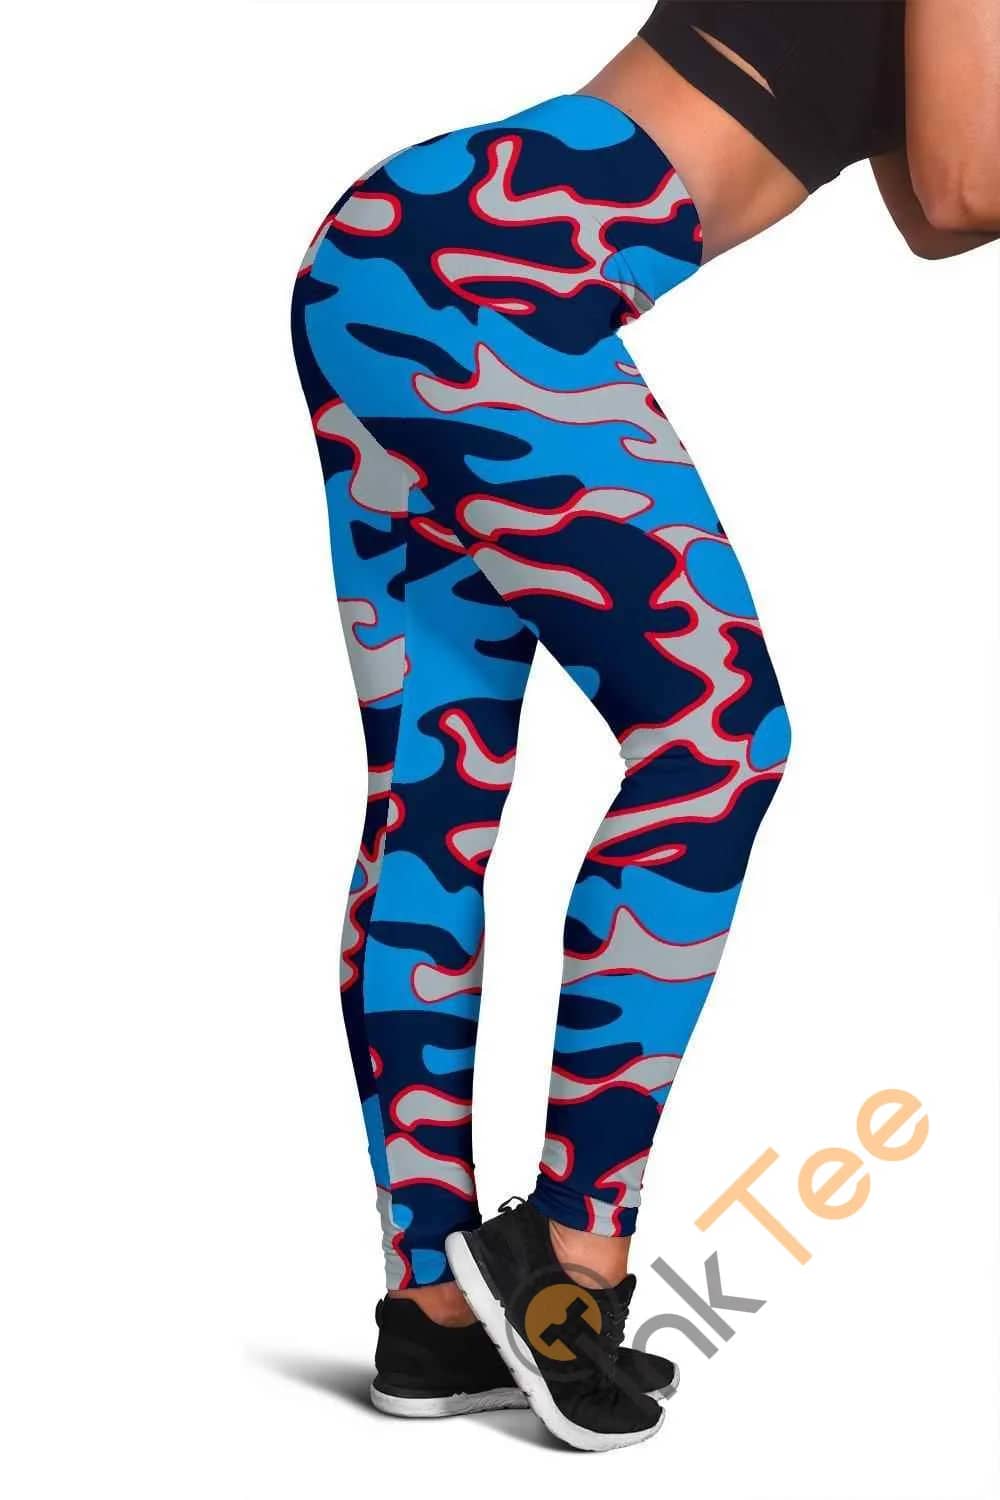 Tennessee Titans Inspired Tru Camo 3D All Over Print For Yoga Fitness Fashion Women's Leggings